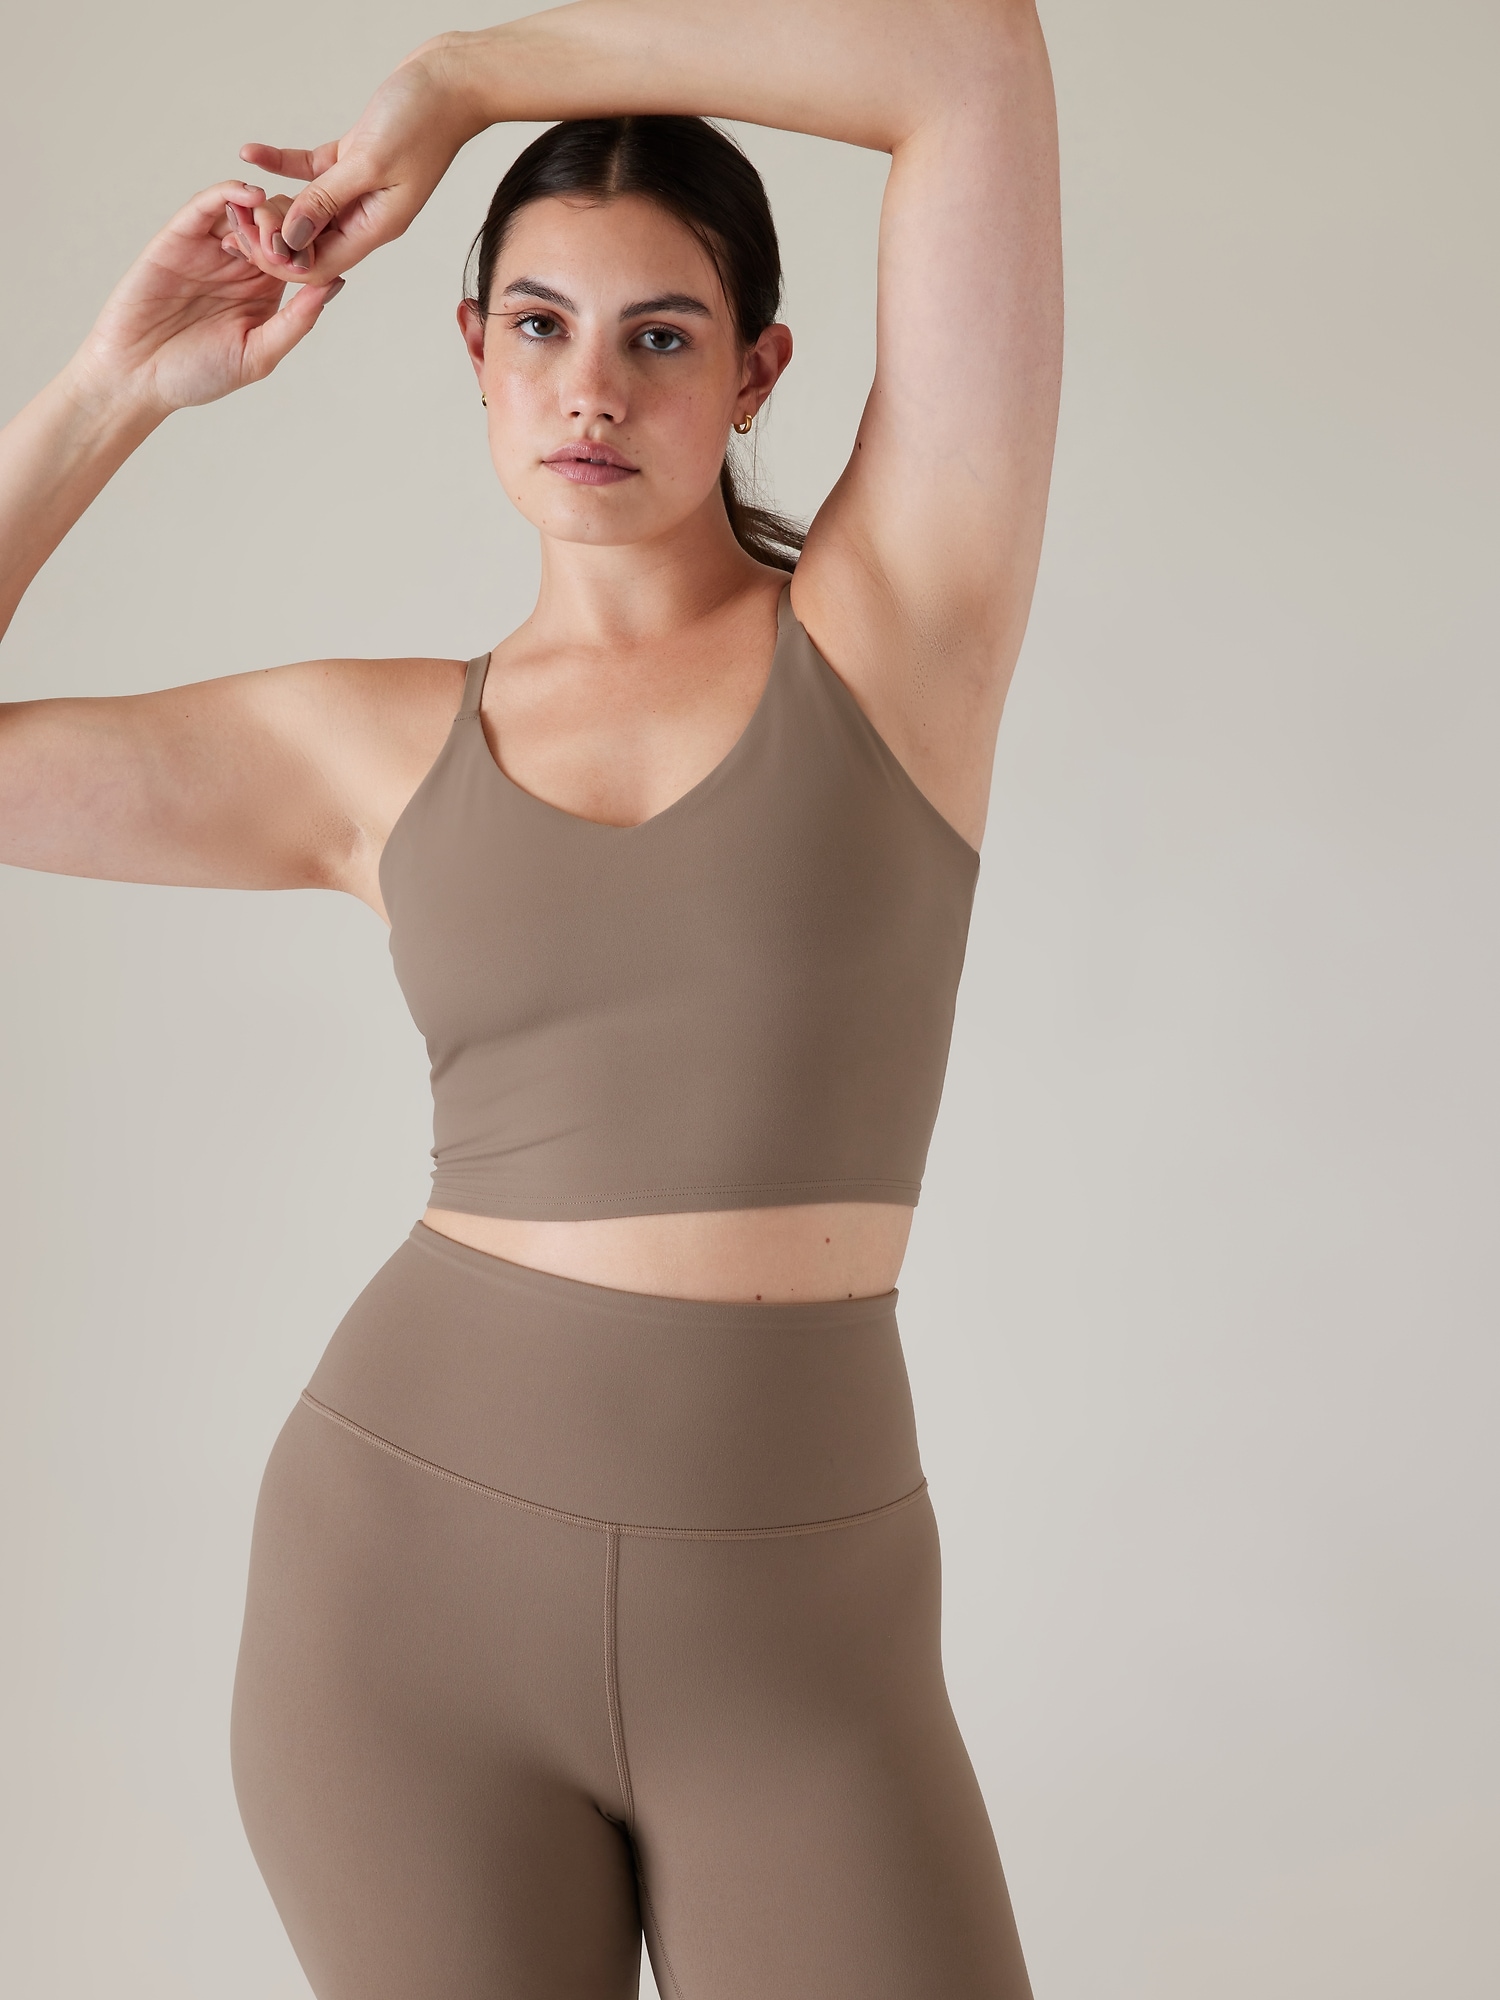 Explore Recycled Polyester High Neck Longline Light Support Sports